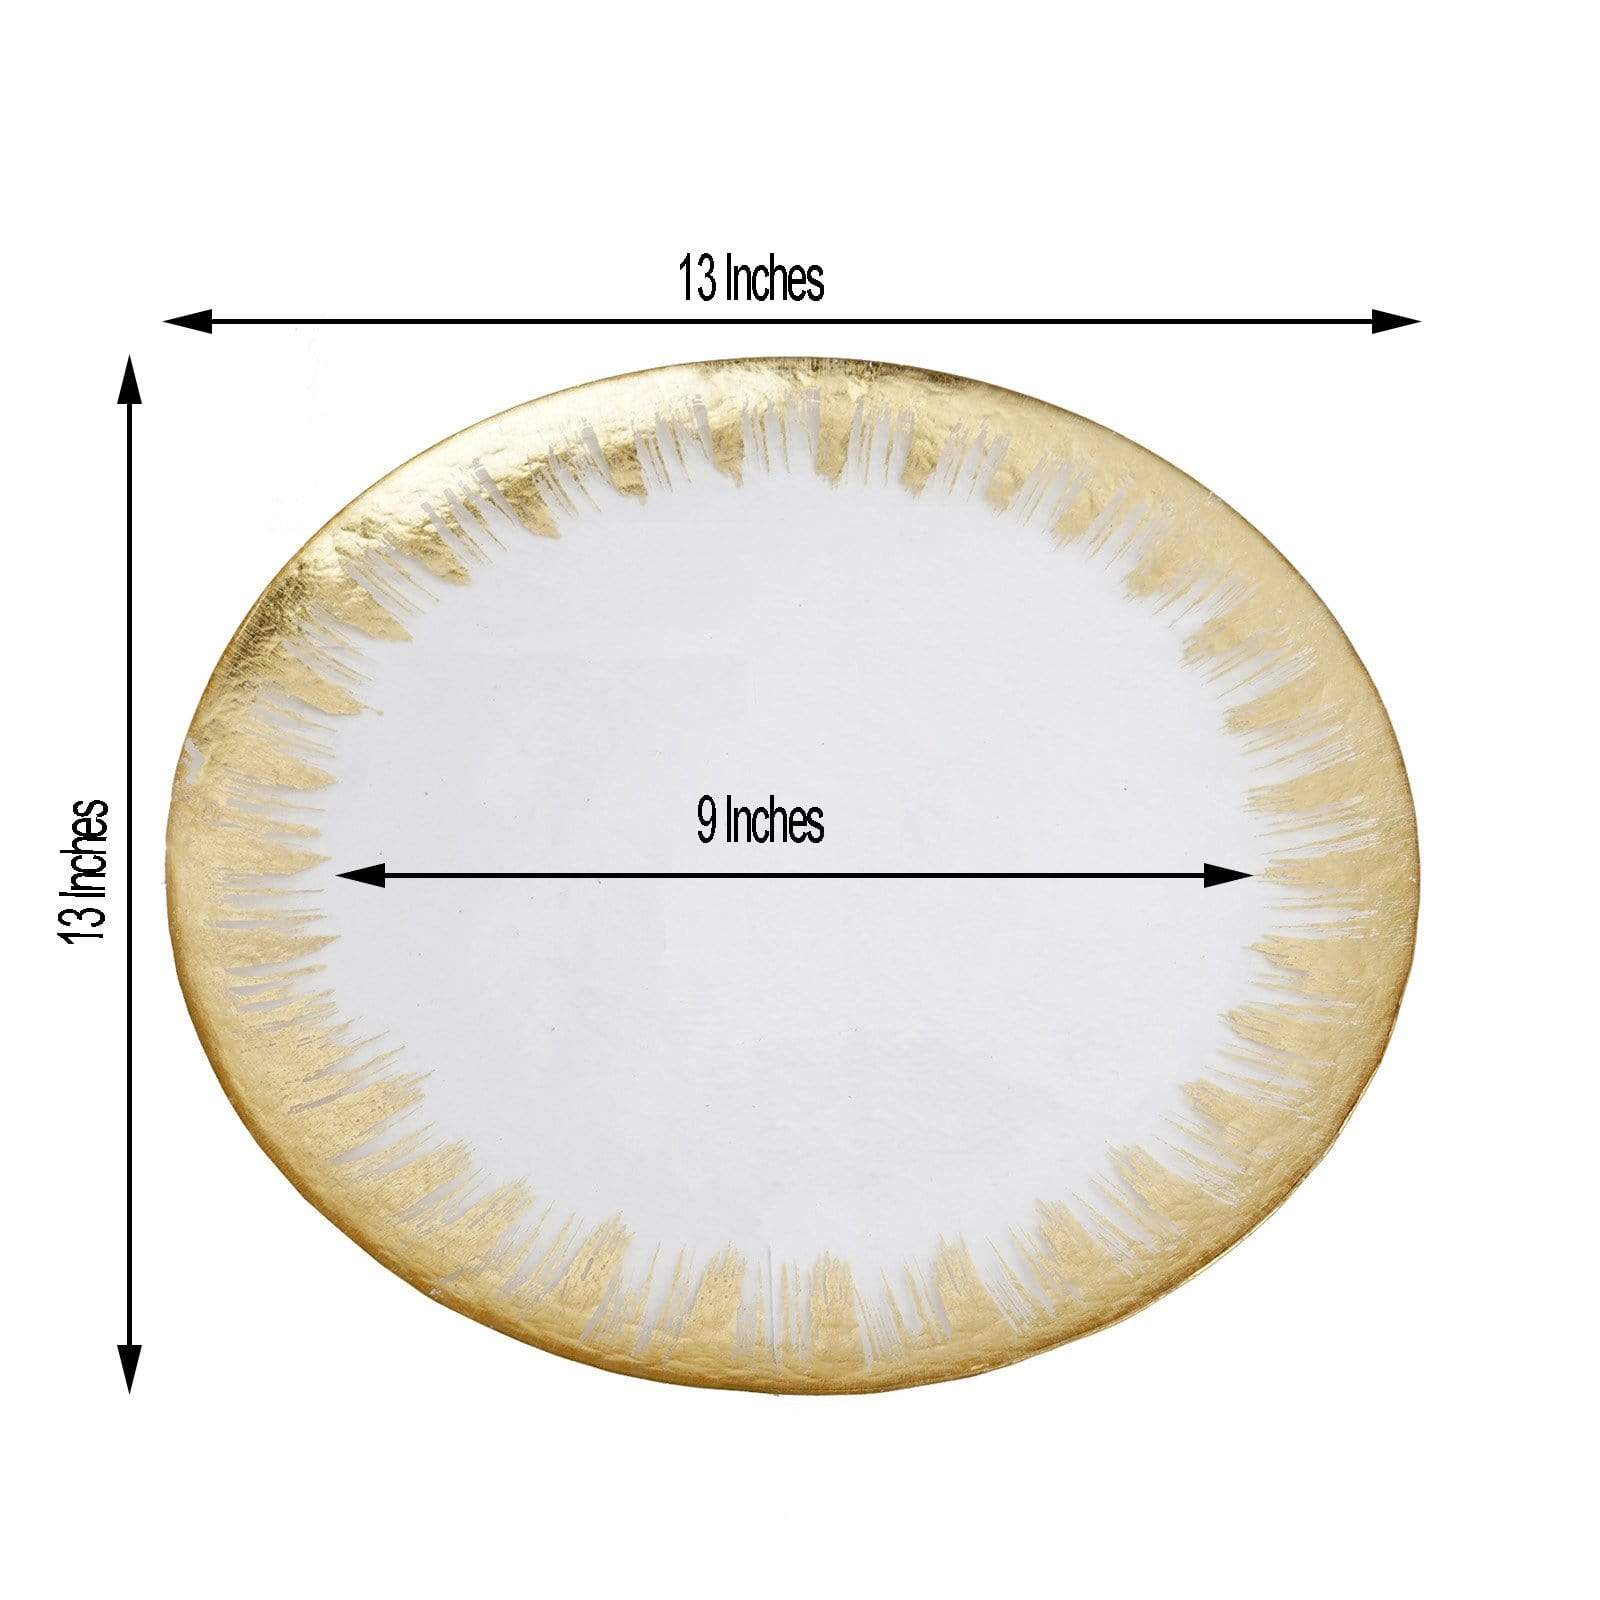 8 pcs 13 in Rimmed Glass Charger Plates